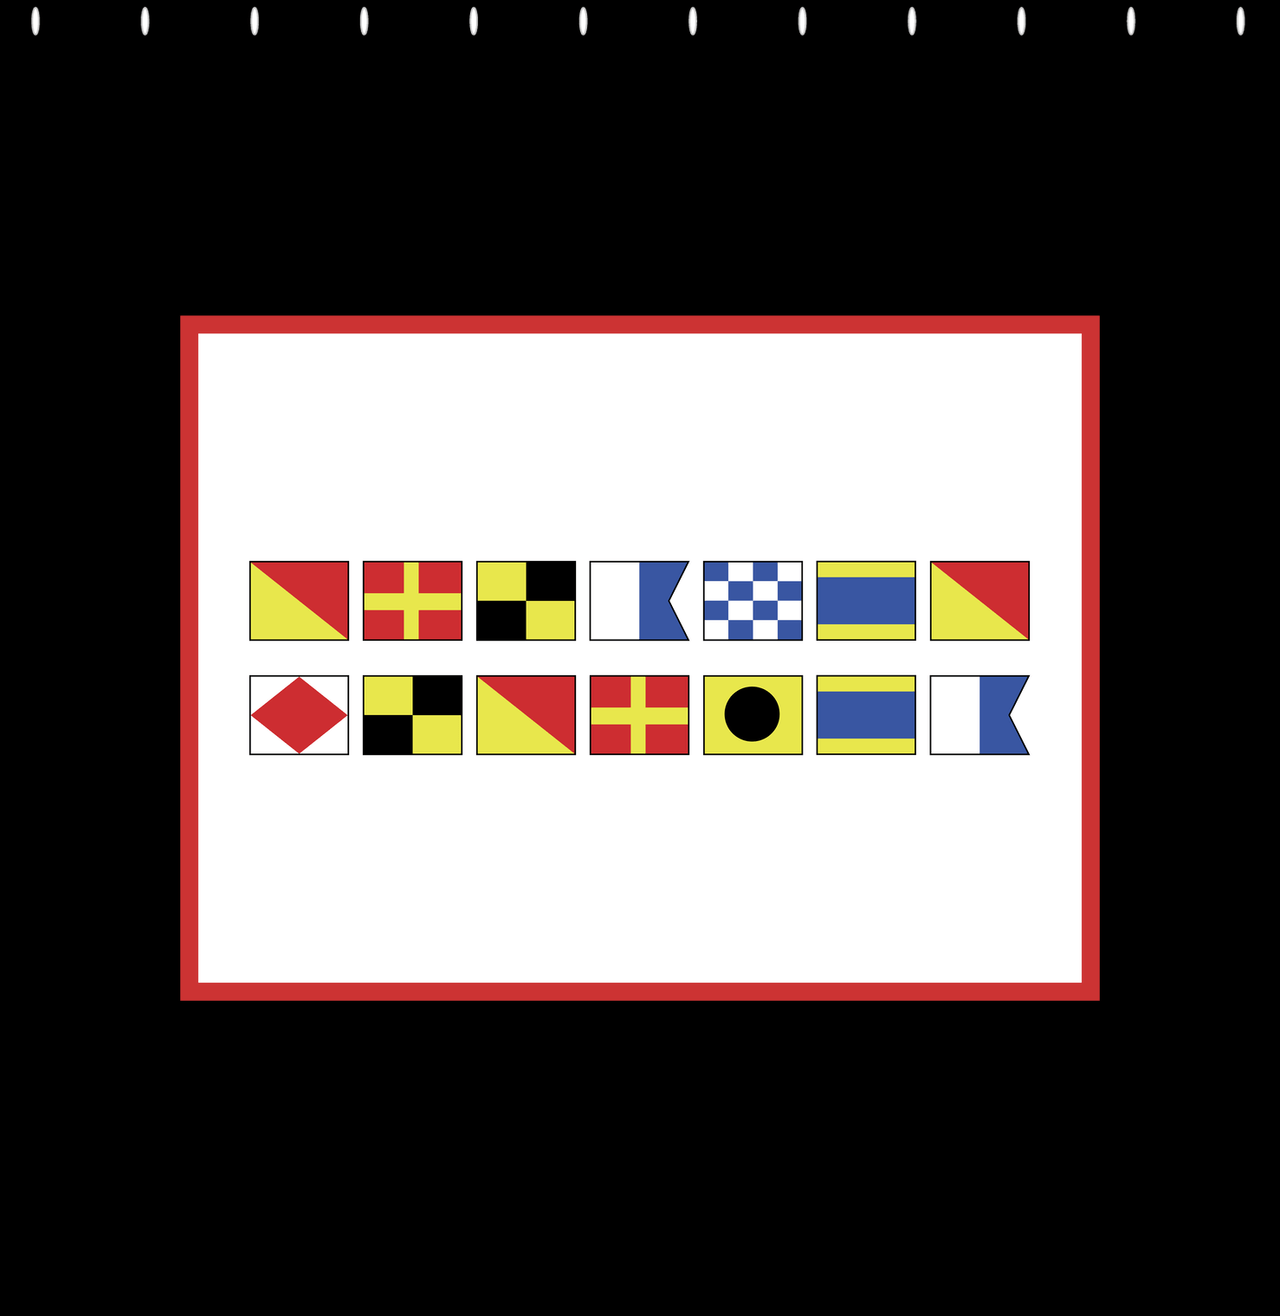 Personalized Nautical Flags Shower Curtain - Black and Red - Flags Without Letters - Decorate View